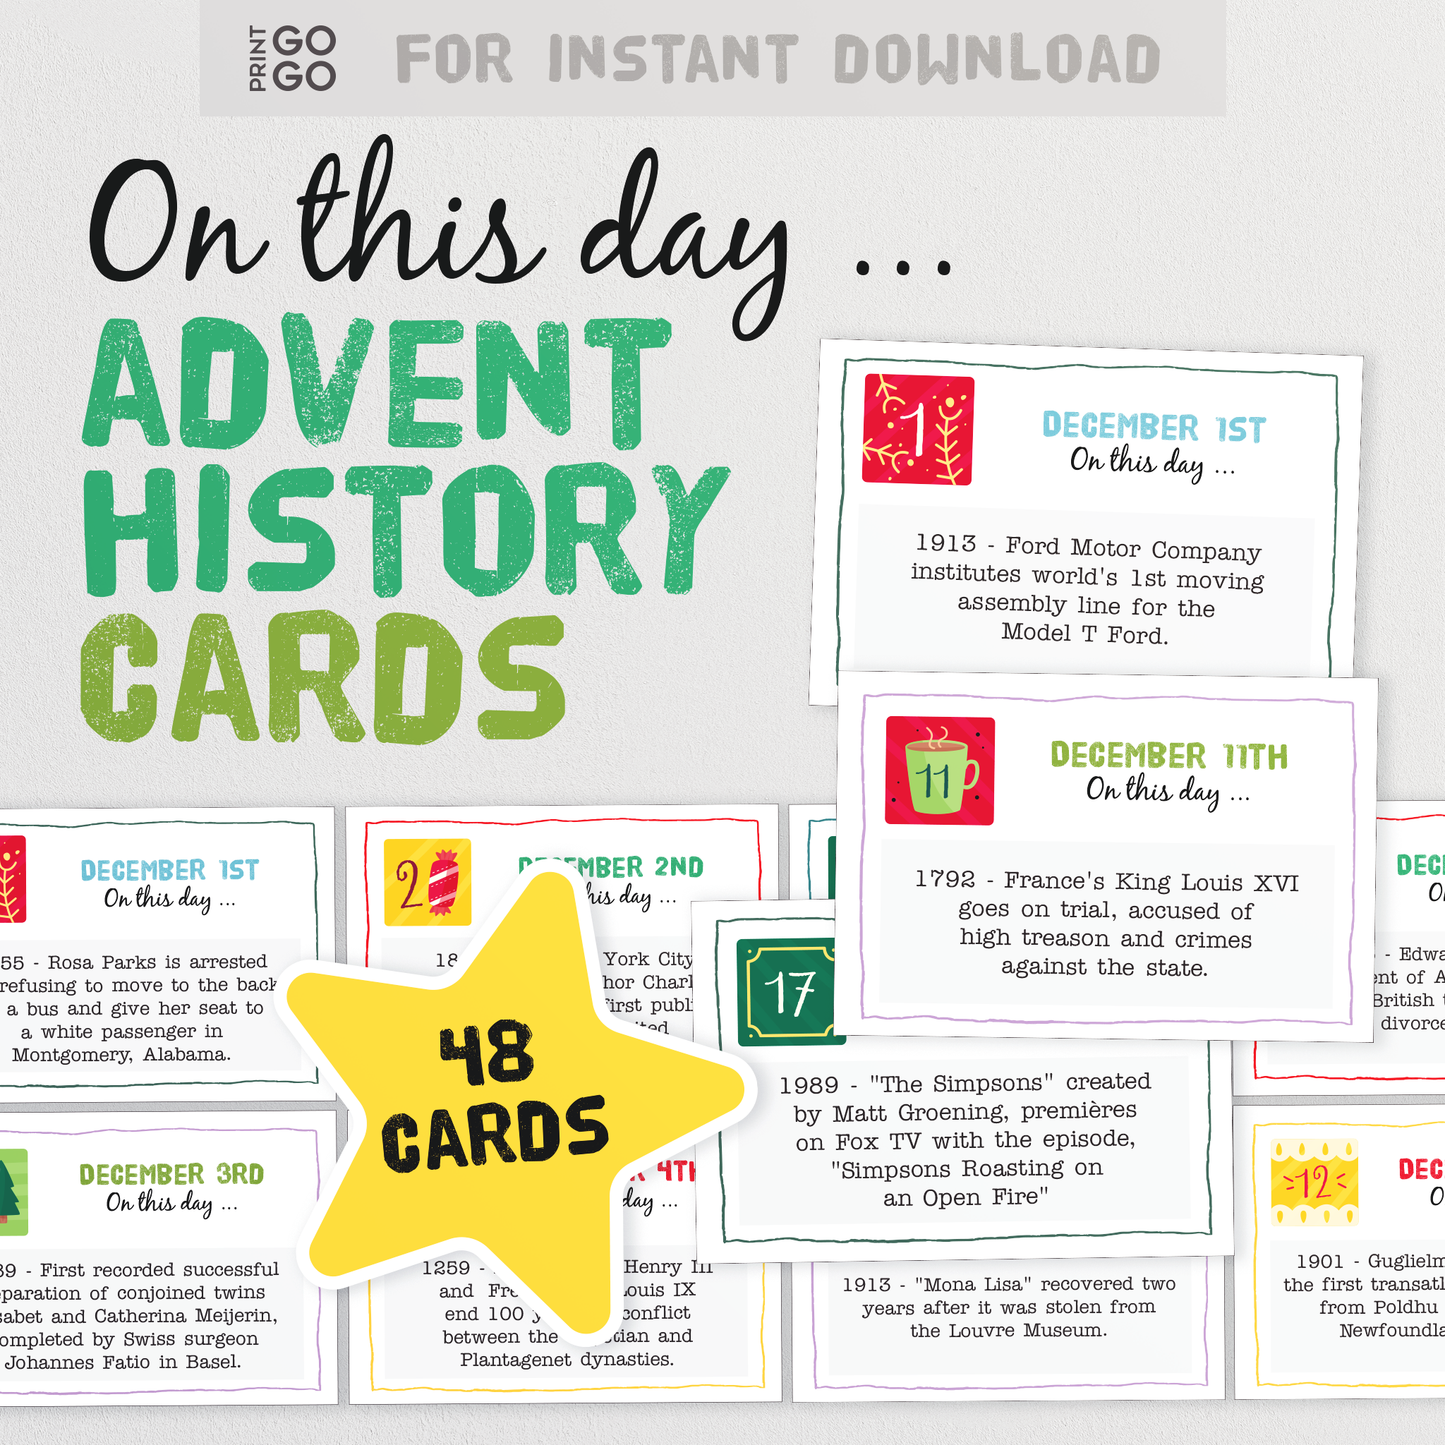 On this day ... Advent History Cards - A Fun and Educational Way to Countdown Christmas | 48 Christmas Advent Calendar Cards | Daily Trivia